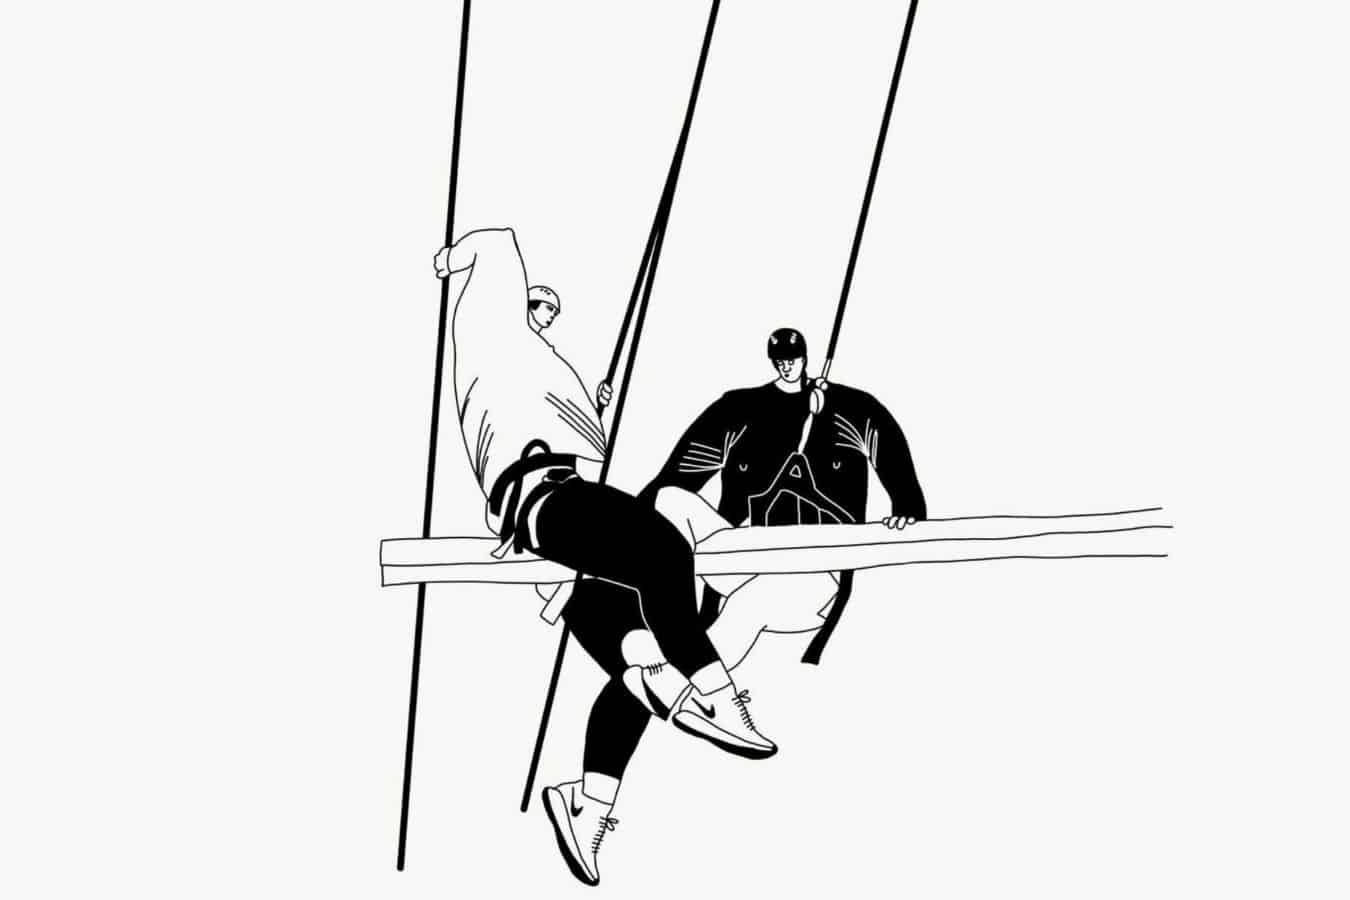 illustration of two people balancing on a tight rope: fractional employment can be a balancing act, but there are ways to keep these teammates fully invested